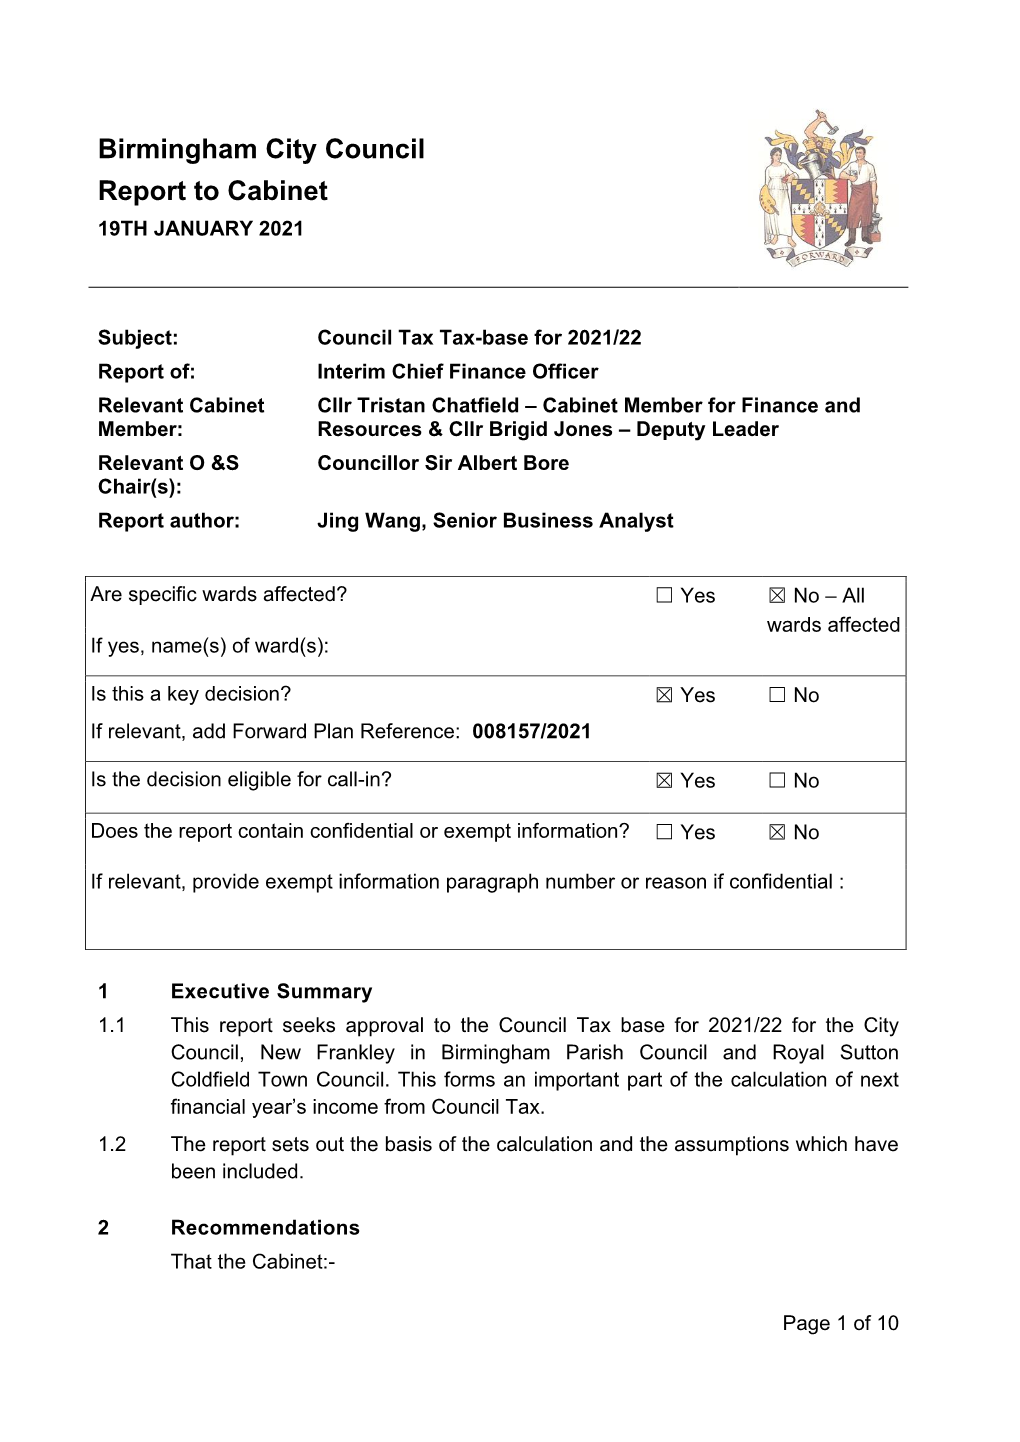 Birmingham City Council Report to Cabinet 19TH JANUARY 2021